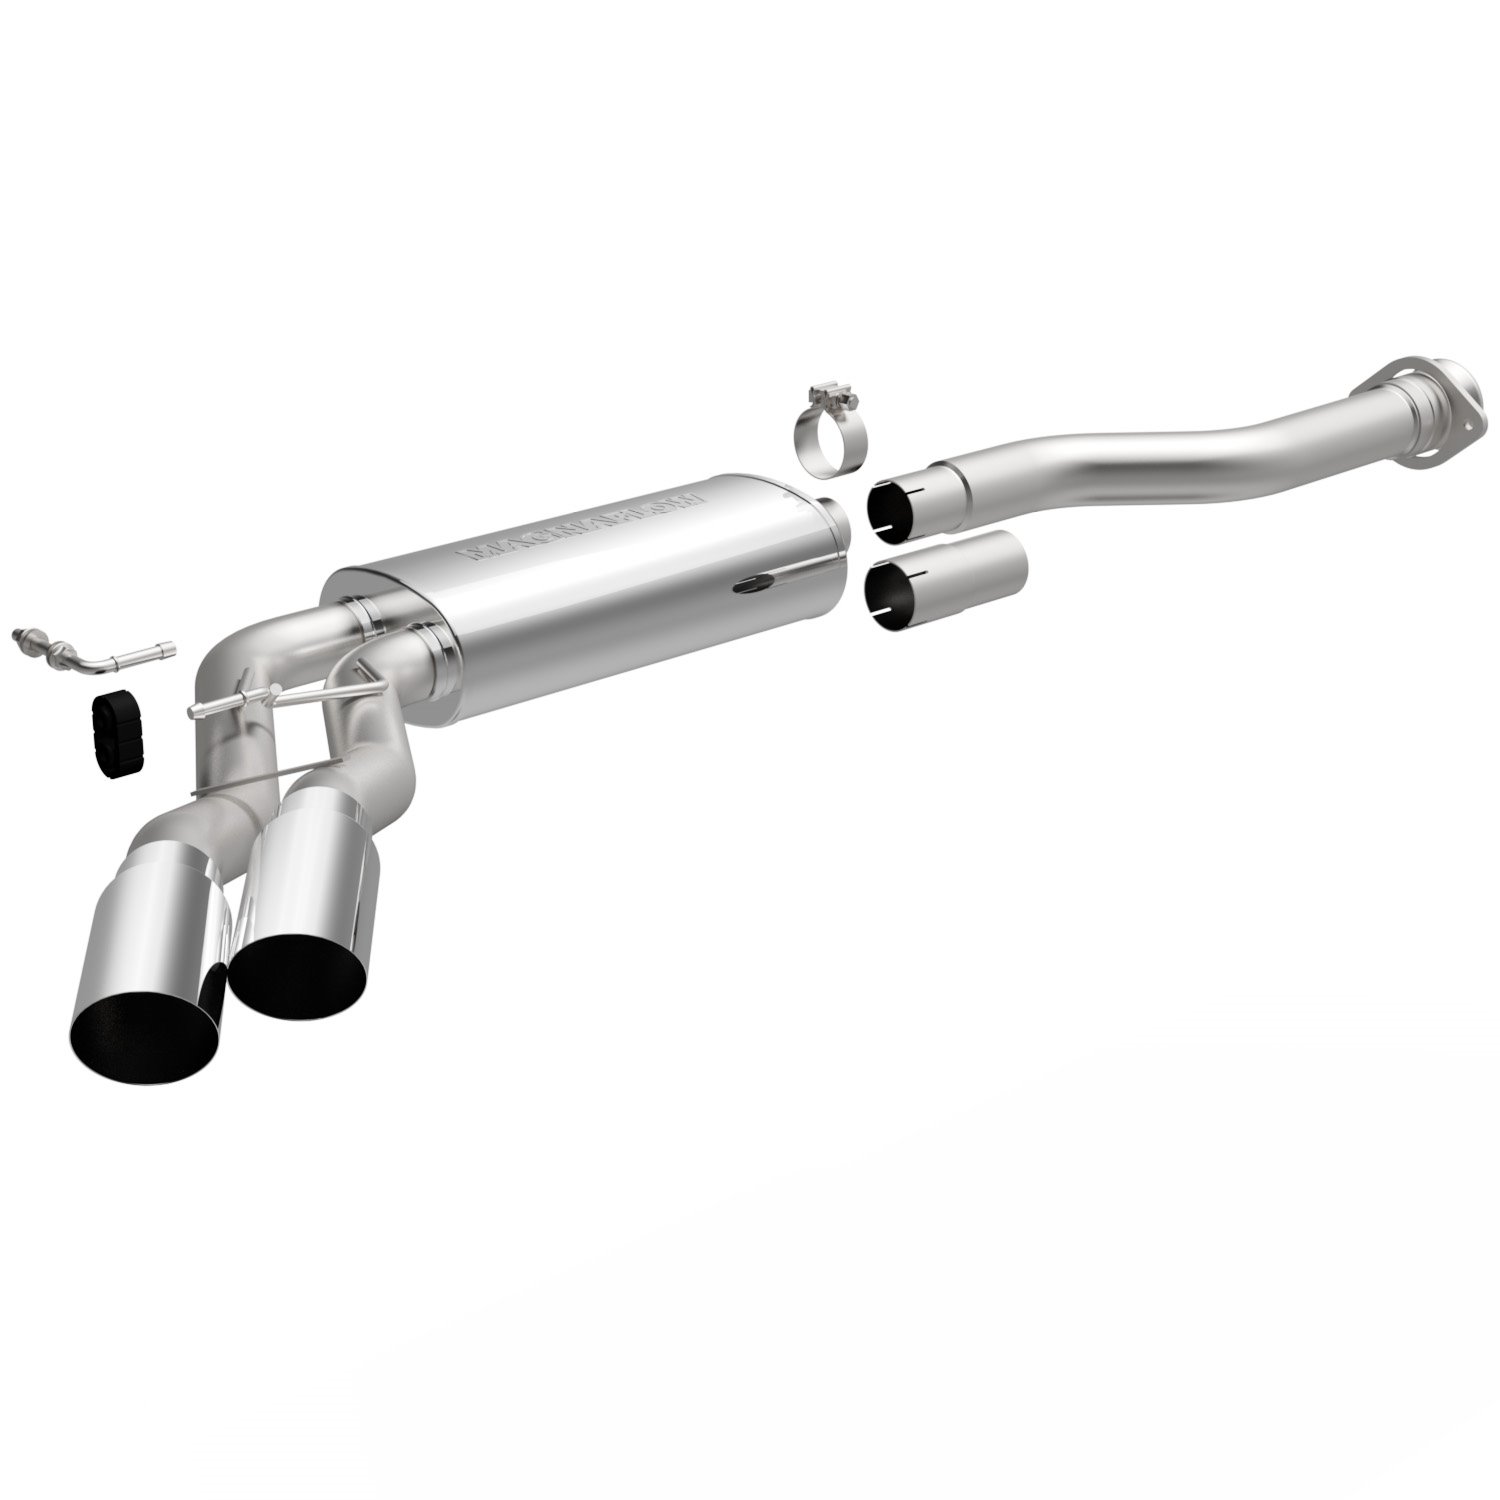 MF Series Cat-Back Exhaust System 2011-14 Ford F-150 6.2L V8